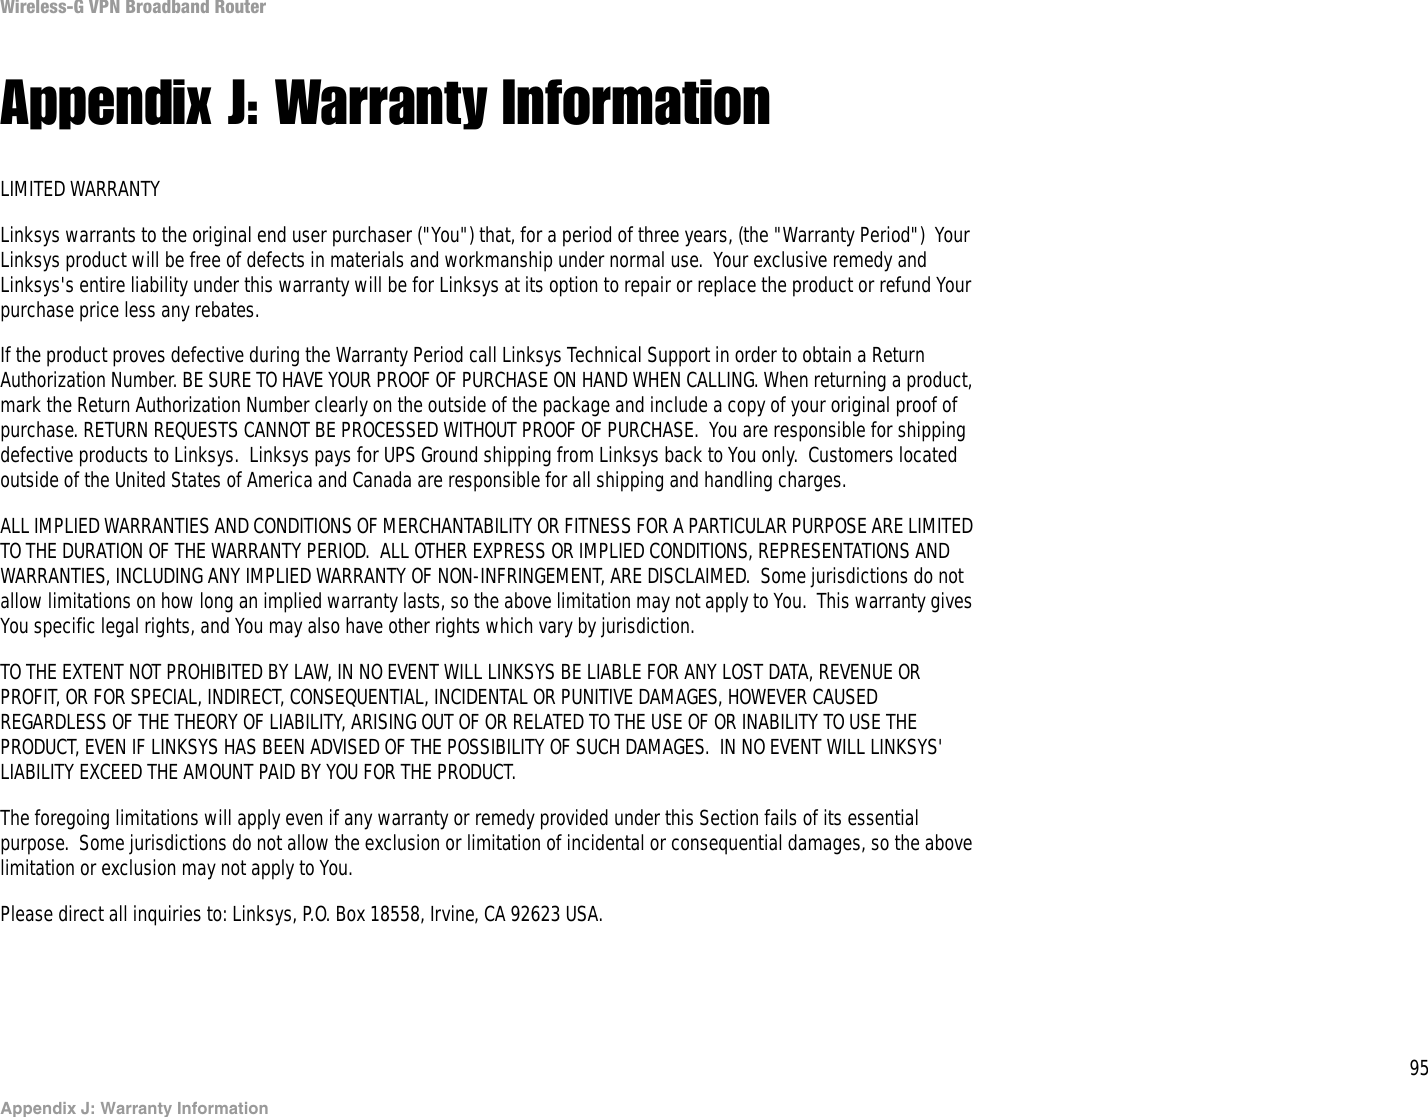 95Appendix J: Warranty InformationWireless-G VPN Broadband RouterAppendix J: Warranty InformationLIMITED WARRANTYLinksys warrants to the original end user purchaser (&quot;You&quot;) that, for a period of three years, (the &quot;Warranty Period&quot;)  Your Linksys product will be free of defects in materials and workmanship under normal use.  Your exclusive remedy and Linksys&apos;s entire liability under this warranty will be for Linksys at its option to repair or replace the product or refund Your purchase price less any rebates.If the product proves defective during the Warranty Period call Linksys Technical Support in order to obtain a Return Authorization Number. BE SURE TO HAVE YOUR PROOF OF PURCHASE ON HAND WHEN CALLING. When returning a product, mark the Return Authorization Number clearly on the outside of the package and include a copy of your original proof of purchase. RETURN REQUESTS CANNOT BE PROCESSED WITHOUT PROOF OF PURCHASE.  You are responsible for shipping defective products to Linksys.  Linksys pays for UPS Ground shipping from Linksys back to You only.  Customers located outside of the United States of America and Canada are responsible for all shipping and handling charges. ALL IMPLIED WARRANTIES AND CONDITIONS OF MERCHANTABILITY OR FITNESS FOR A PARTICULAR PURPOSE ARE LIMITED TO THE DURATION OF THE WARRANTY PERIOD.  ALL OTHER EXPRESS OR IMPLIED CONDITIONS, REPRESENTATIONS AND WARRANTIES, INCLUDING ANY IMPLIED WARRANTY OF NON-INFRINGEMENT, ARE DISCLAIMED.  Some jurisdictions do not allow limitations on how long an implied warranty lasts, so the above limitation may not apply to You.  This warranty gives You specific legal rights, and You may also have other rights which vary by jurisdiction.TO THE EXTENT NOT PROHIBITED BY LAW, IN NO EVENT WILL LINKSYS BE LIABLE FOR ANY LOST DATA, REVENUE OR PROFIT, OR FOR SPECIAL, INDIRECT, CONSEQUENTIAL, INCIDENTAL OR PUNITIVE DAMAGES, HOWEVER CAUSED REGARDLESS OF THE THEORY OF LIABILITY, ARISING OUT OF OR RELATED TO THE USE OF OR INABILITY TO USE THE PRODUCT, EVEN IF LINKSYS HAS BEEN ADVISED OF THE POSSIBILITY OF SUCH DAMAGES.  IN NO EVENT WILL LINKSYS&apos; LIABILITY EXCEED THE AMOUNT PAID BY YOU FOR THE PRODUCT.  The foregoing limitations will apply even if any warranty or remedy provided under this Section fails of its essential purpose.  Some jurisdictions do not allow the exclusion or limitation of incidental or consequential damages, so the above limitation or exclusion may not apply to You.Please direct all inquiries to: Linksys, P.O. Box 18558, Irvine, CA 92623 USA.